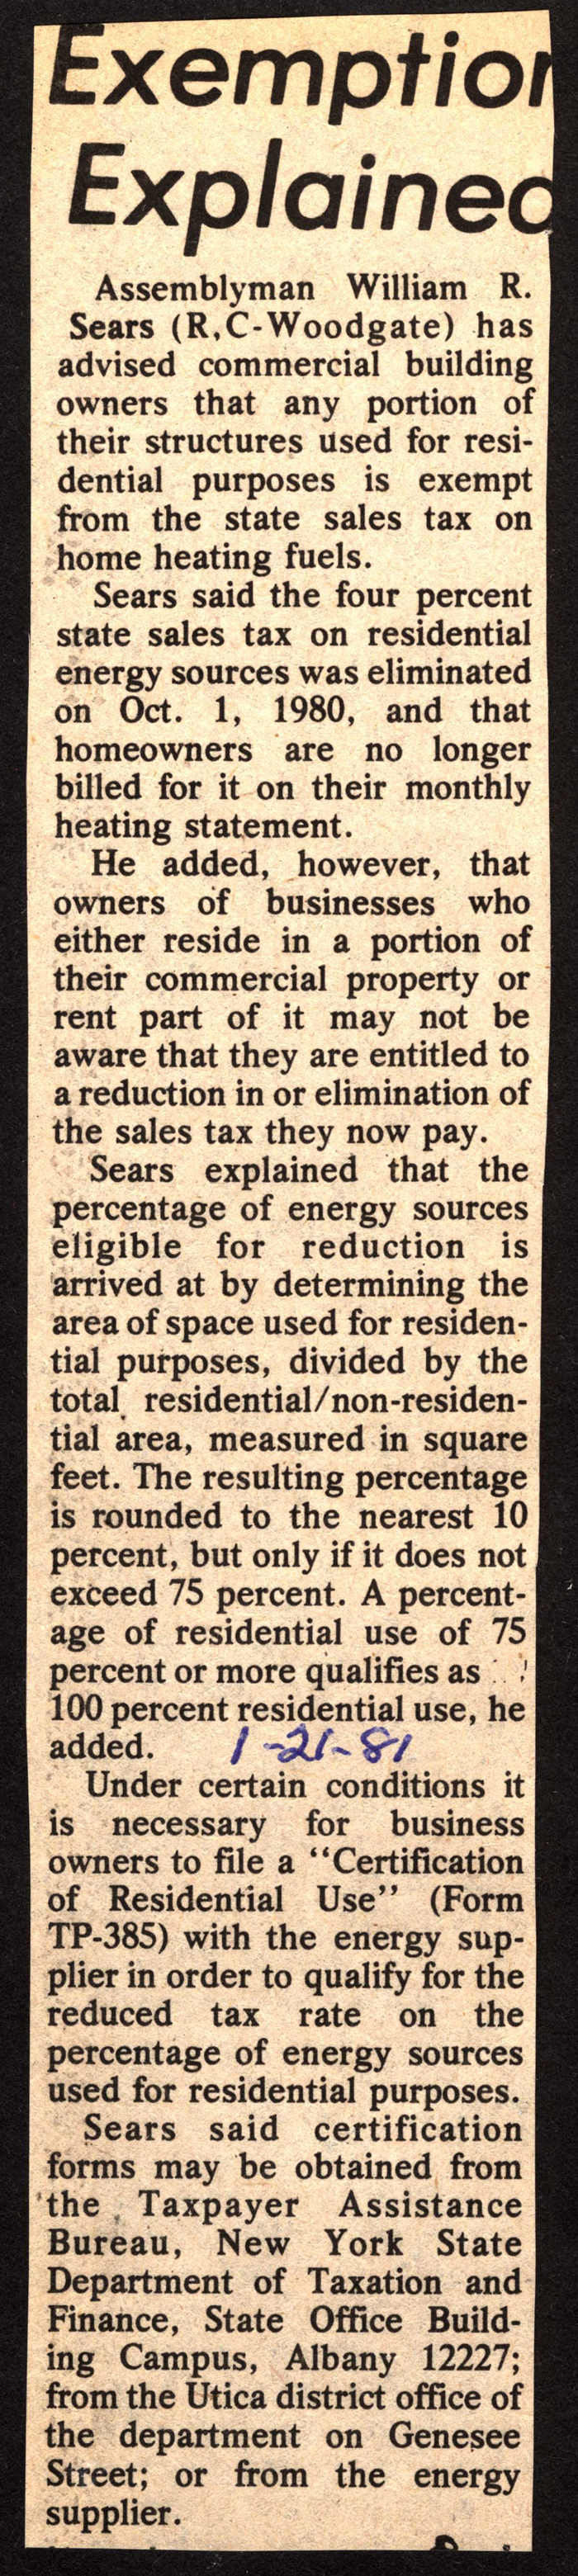 commercial building exemption explained by sears january 21 1981